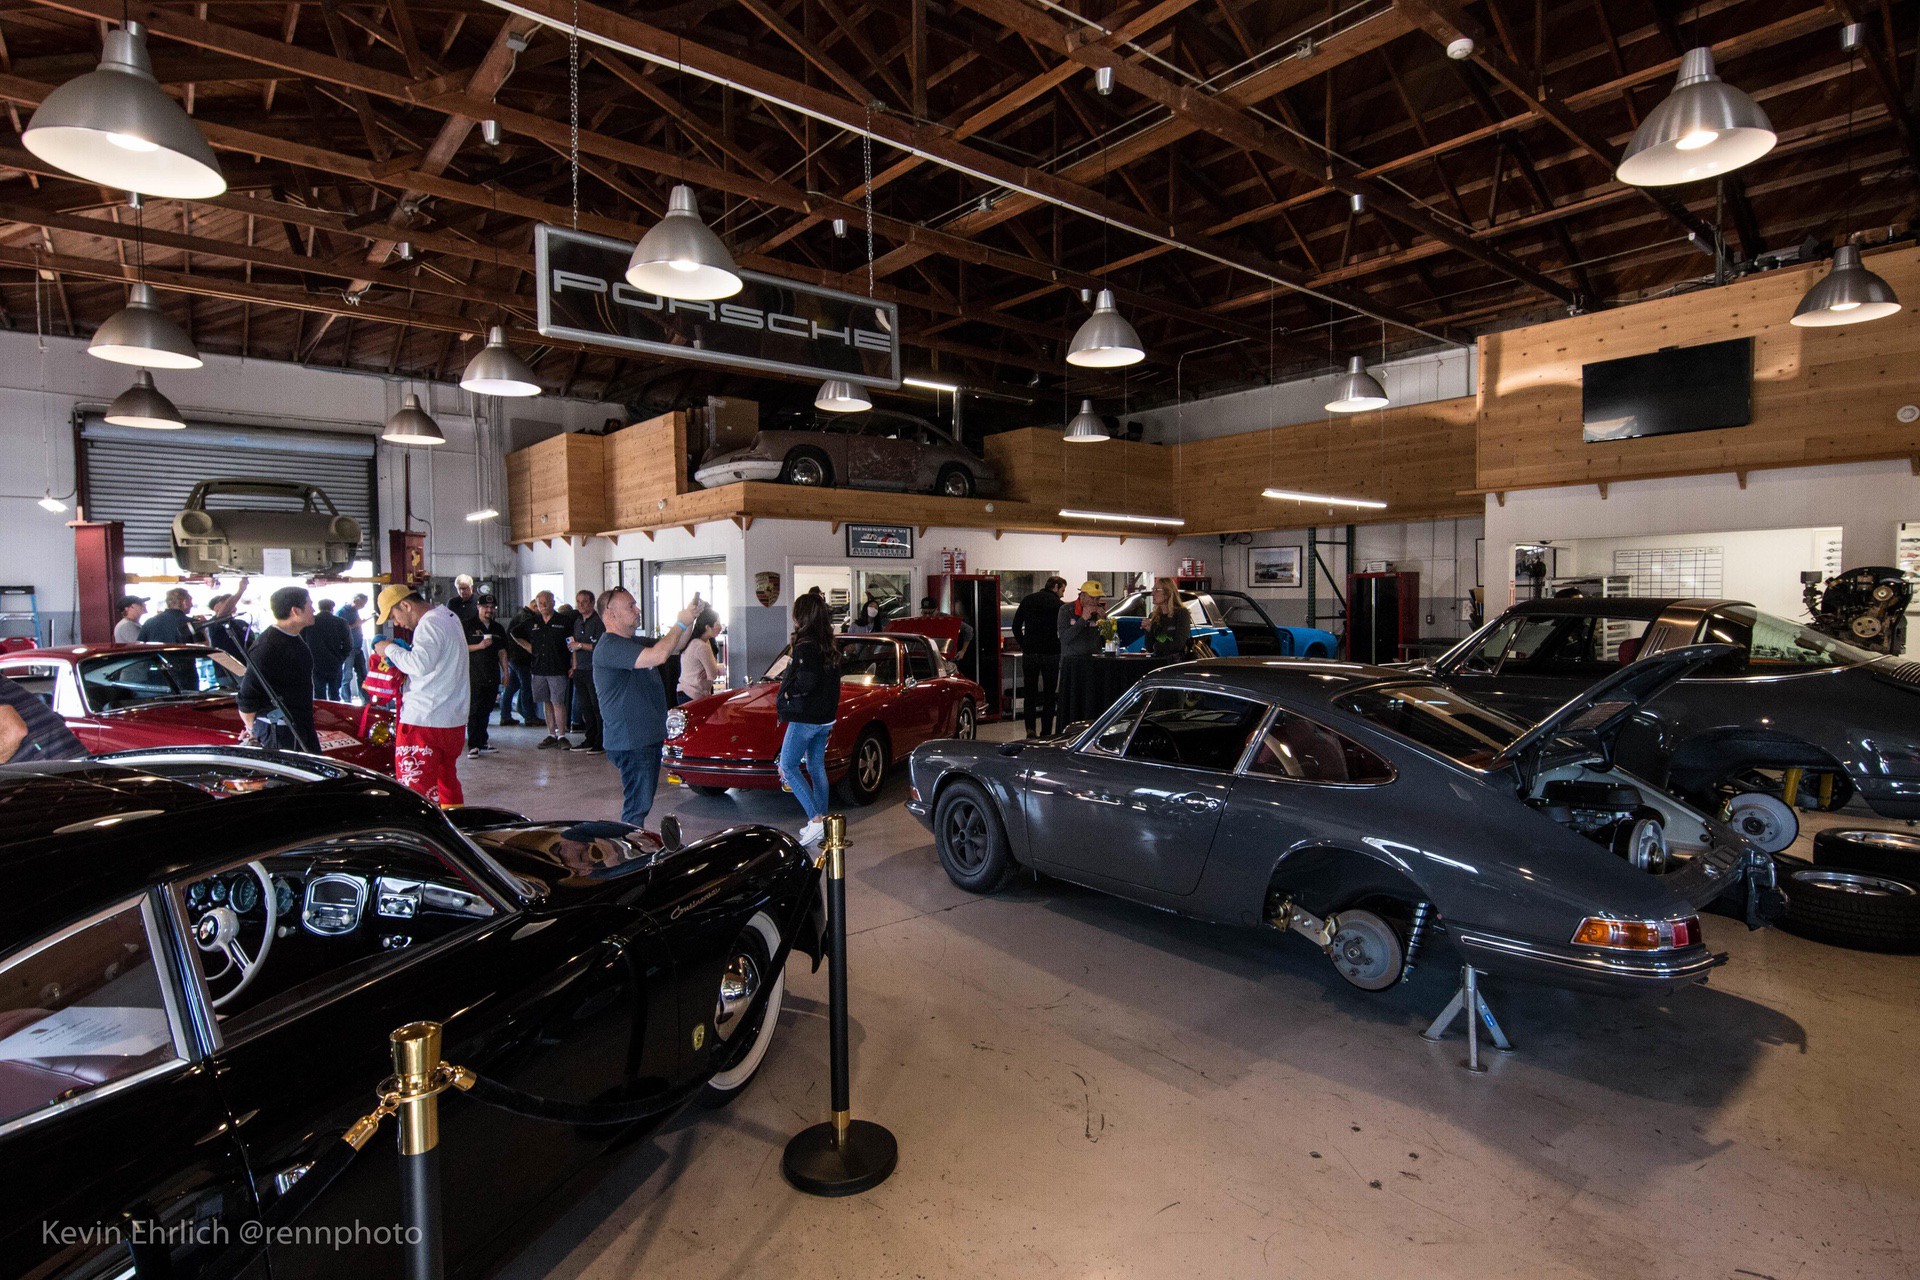 Porsche cars in various stages of restoration at CarParcUSA during 2022 Lit Show weekend in LA